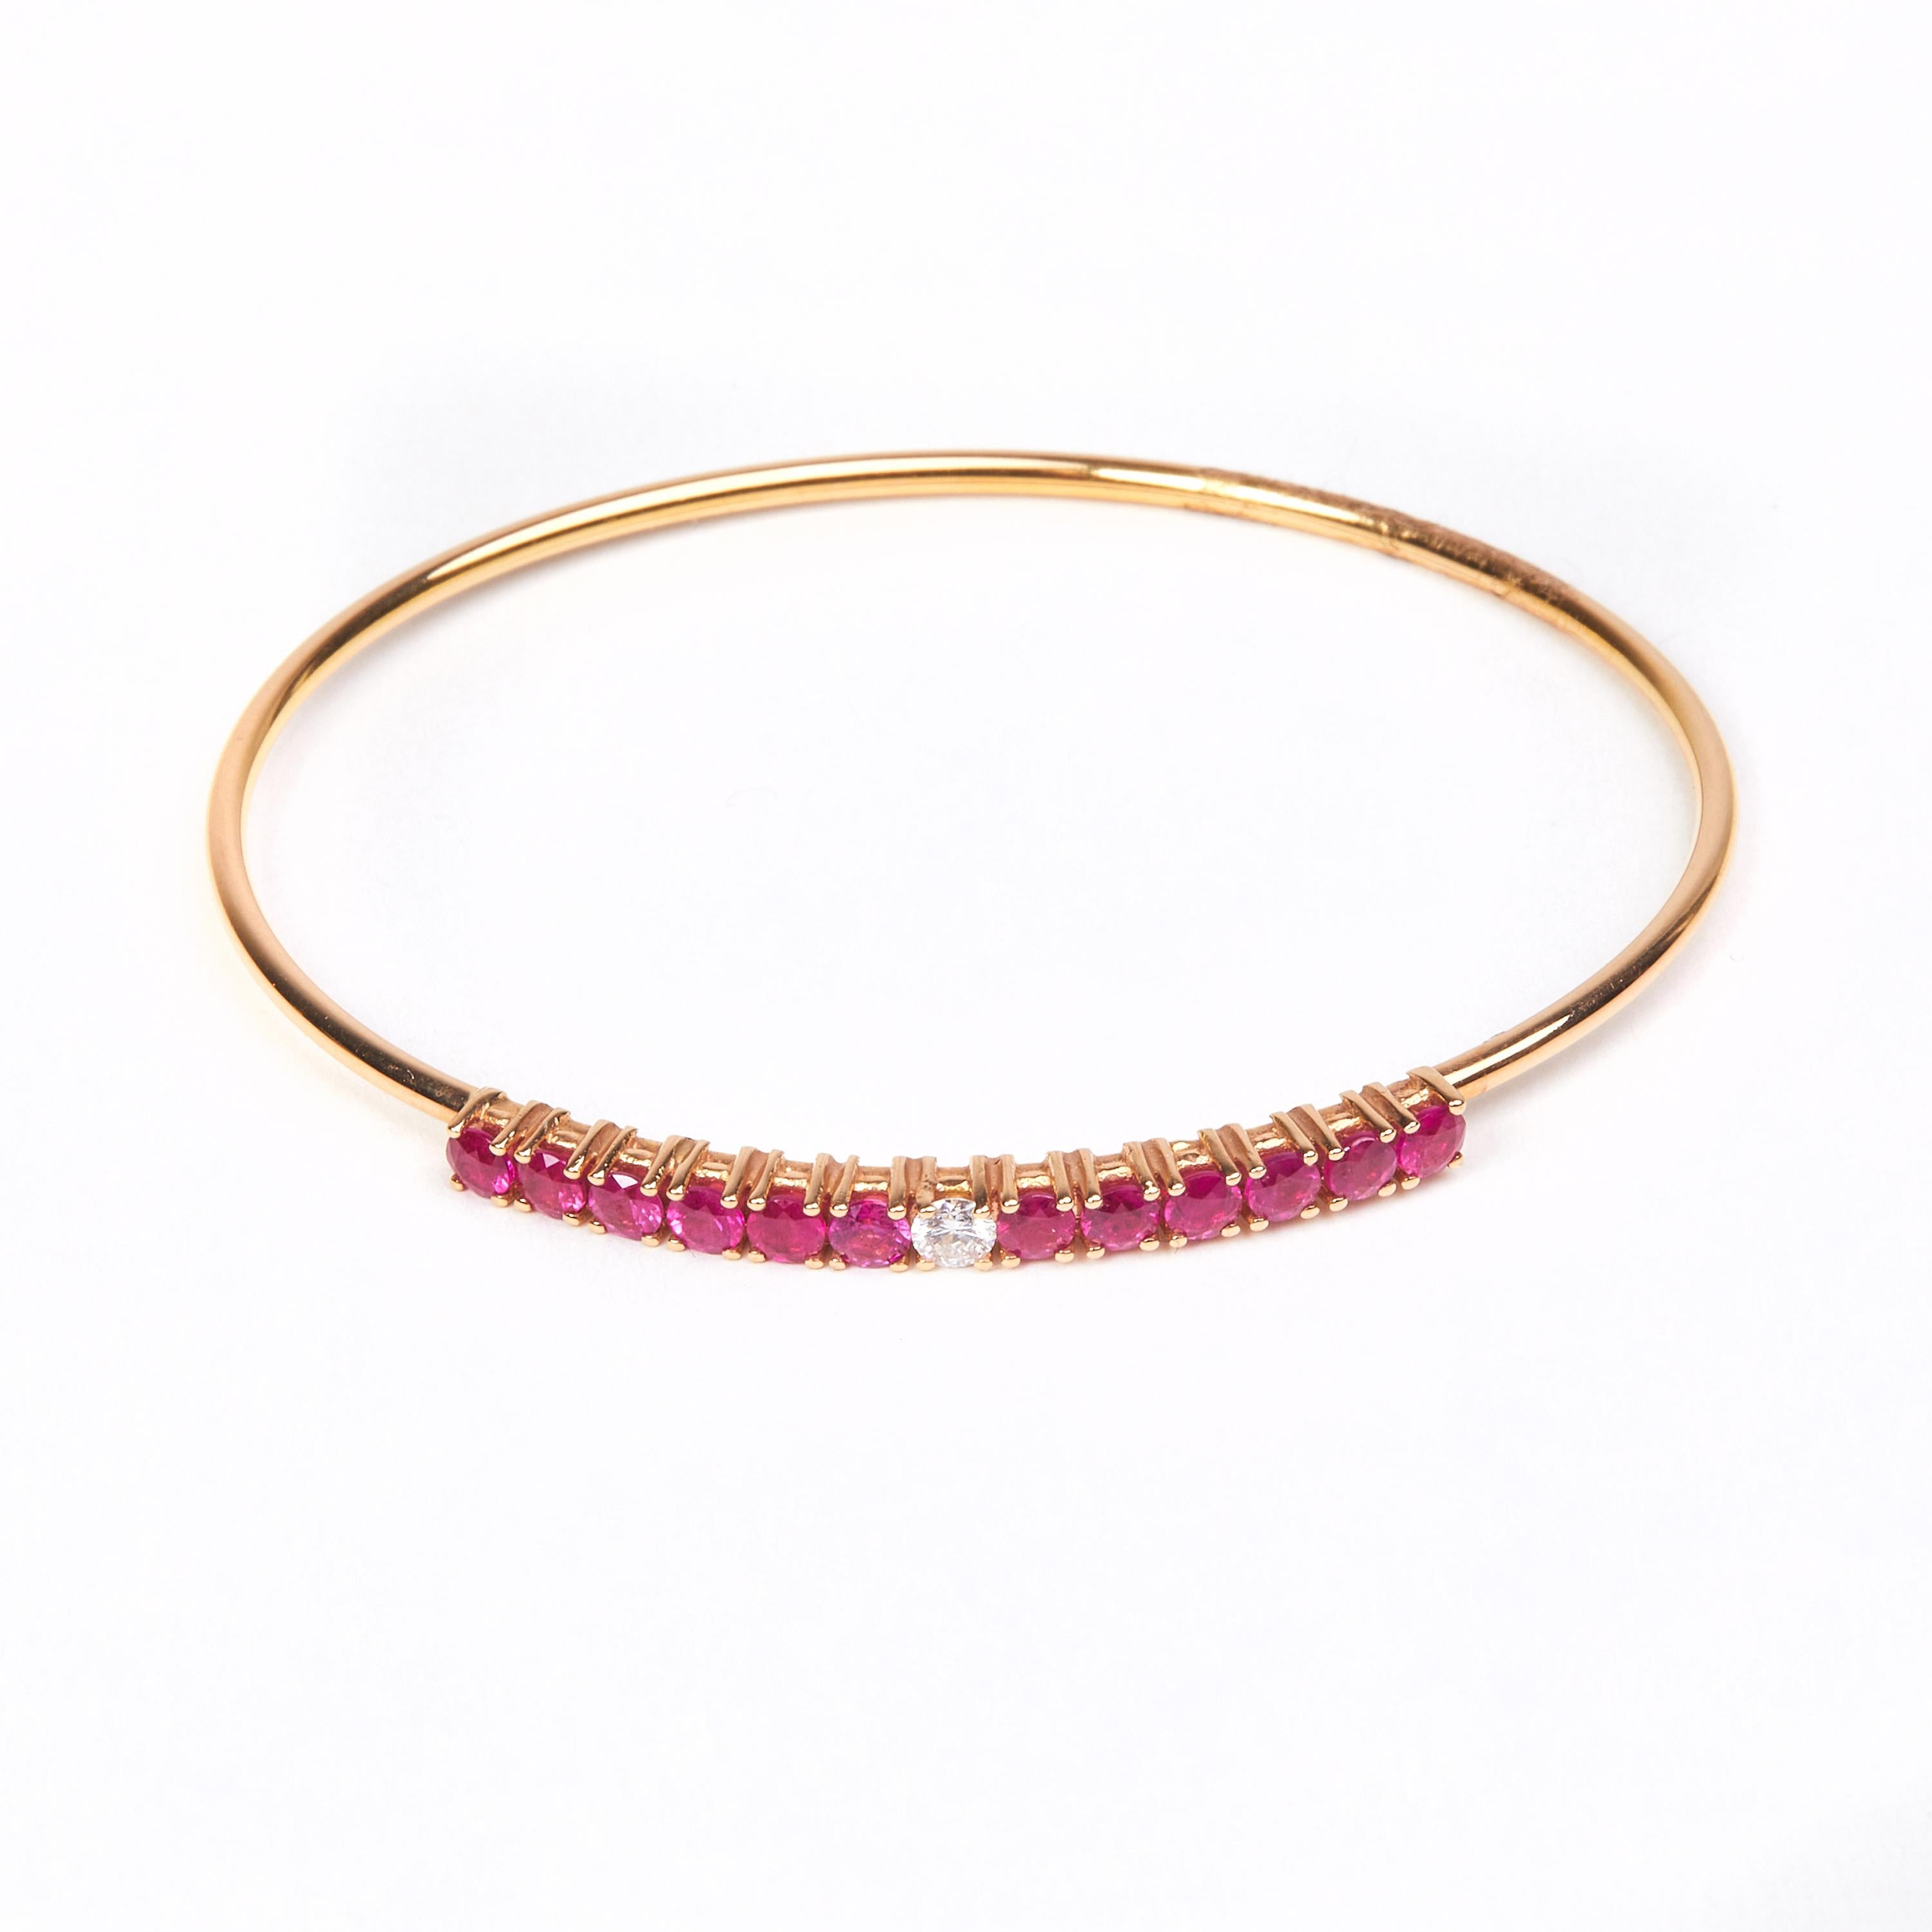 18 Karat Rose Gold Diamond and Ruby Bracelet

1Diamonds 0.12Carat H SI
12 Ruby 1.43 Carat
5,7 x 5.0 cm


Founded in 1974, Gianni Lazzaro is a family-owned jewelry company based out of Düsseldorf, Germany.
Although rooted in Germany, Gianni Lazzaro's